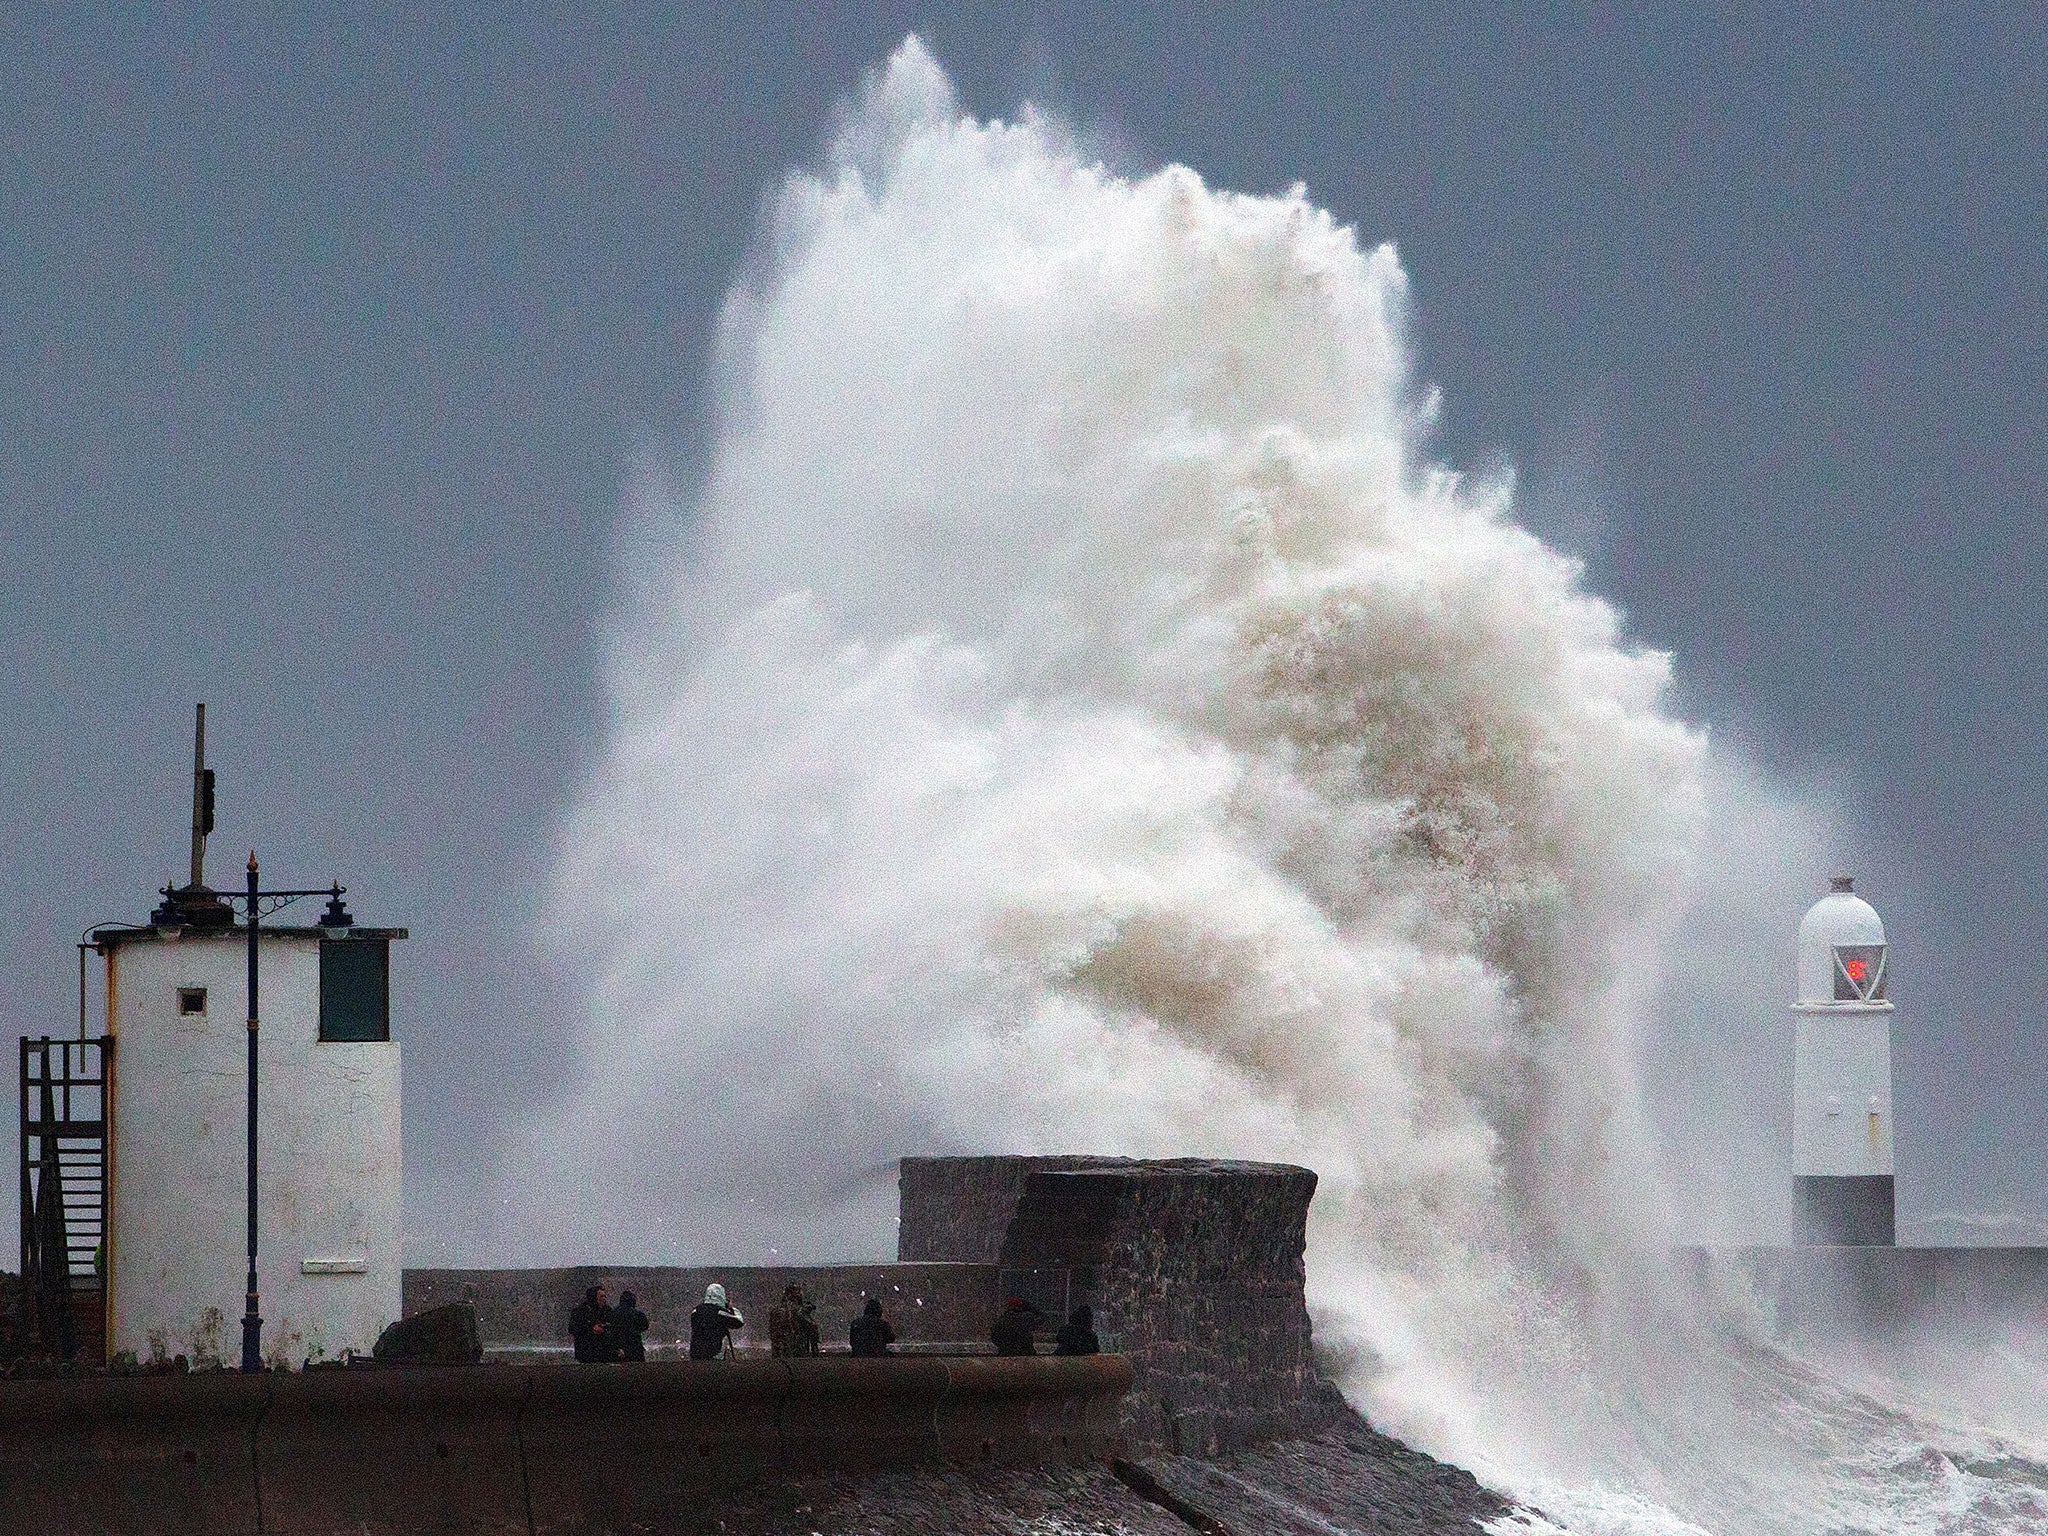 Huge waves are expected to batter the Scottish coast as gales threaten to cause structural damage inland